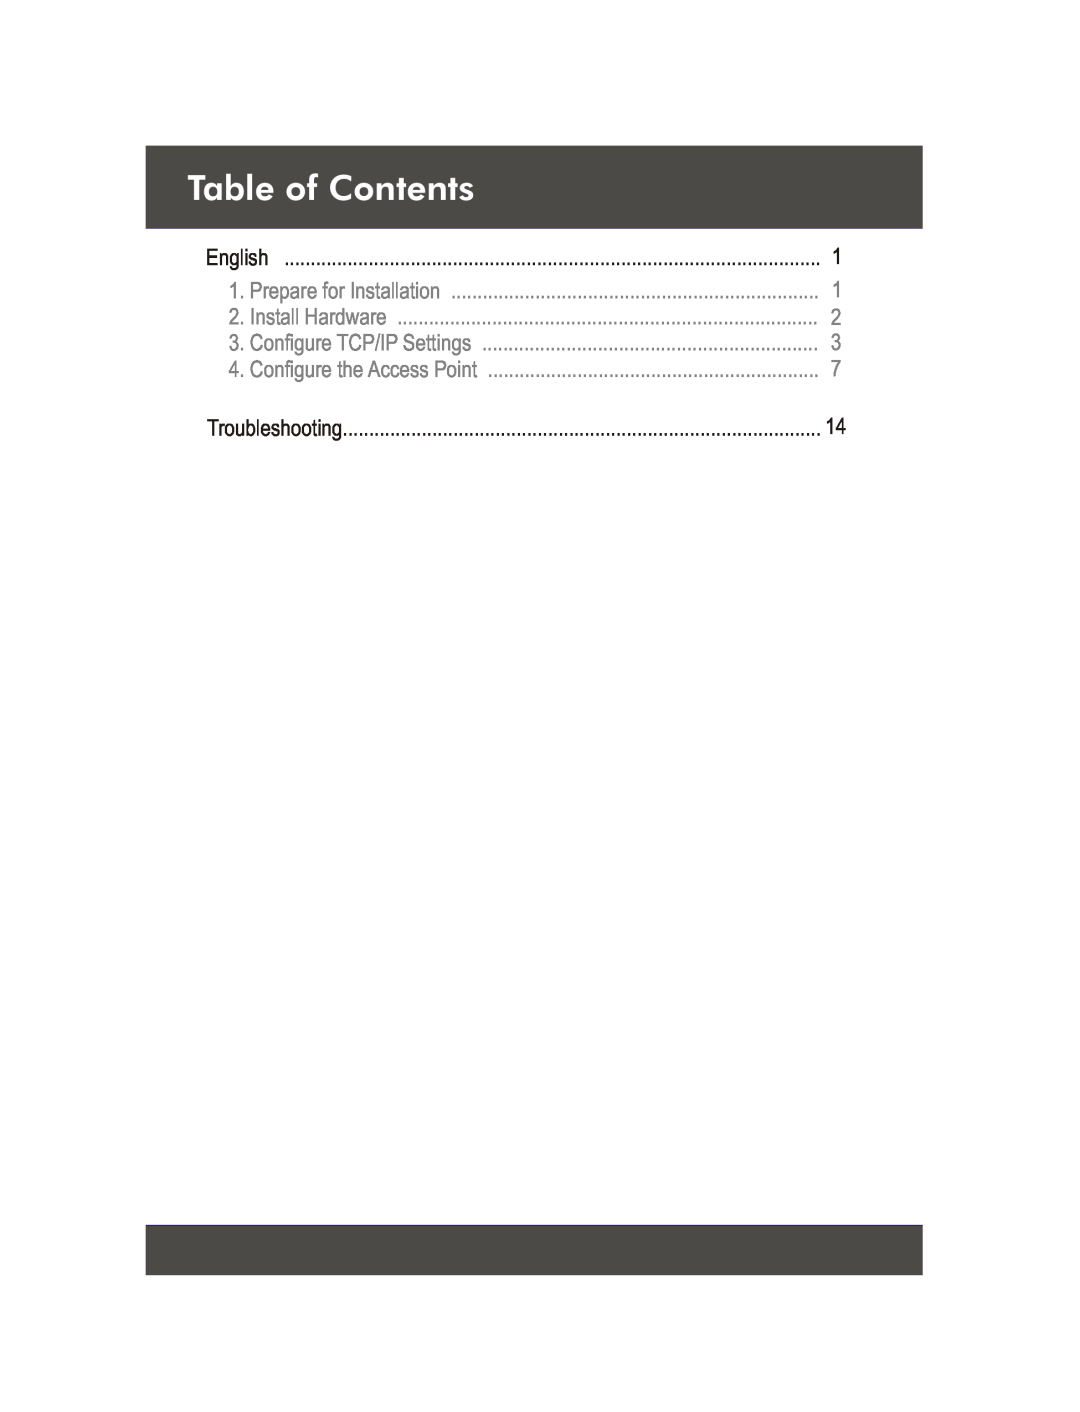 TRENDnet TEW-430APB manual Table of Contents, Prepare for Installation, Install Hardware, Configure TCP/IP Settings 